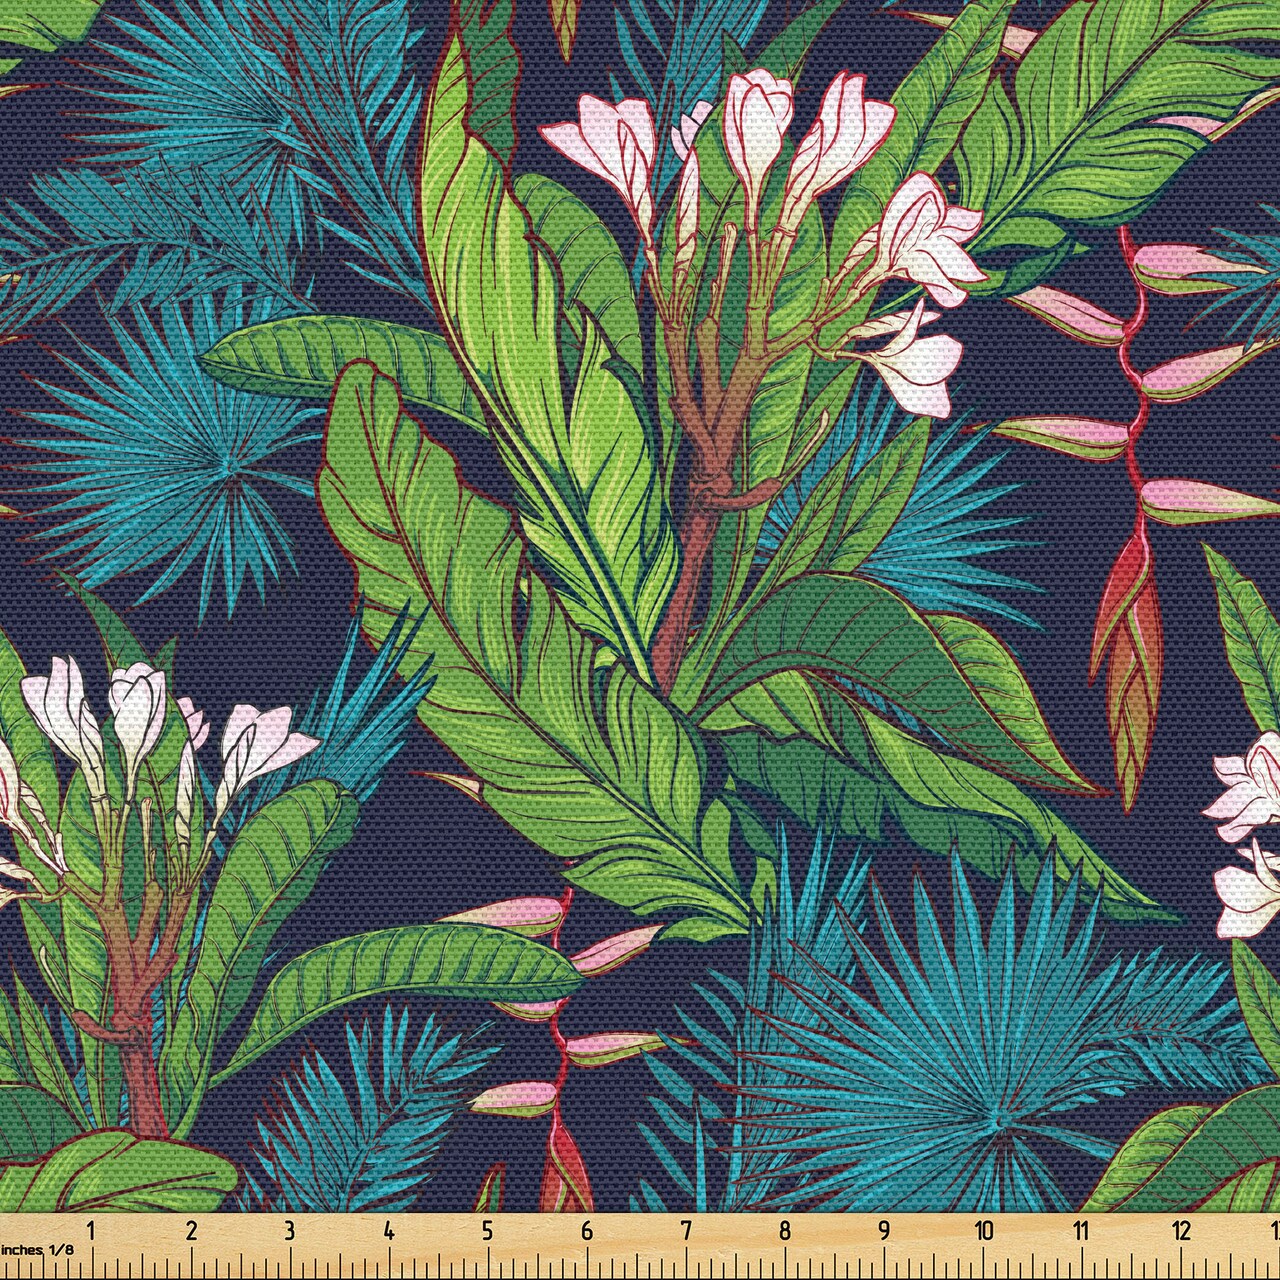 Ambesonne Leaf Fabric by the Yard, Tropical Jungle Palm Tree Banana Leaves Frangipani Heliconia on a Dark Blue Background, Decorative Fabric for Upholstery and Home Accents, 5 Yards, Multicolor